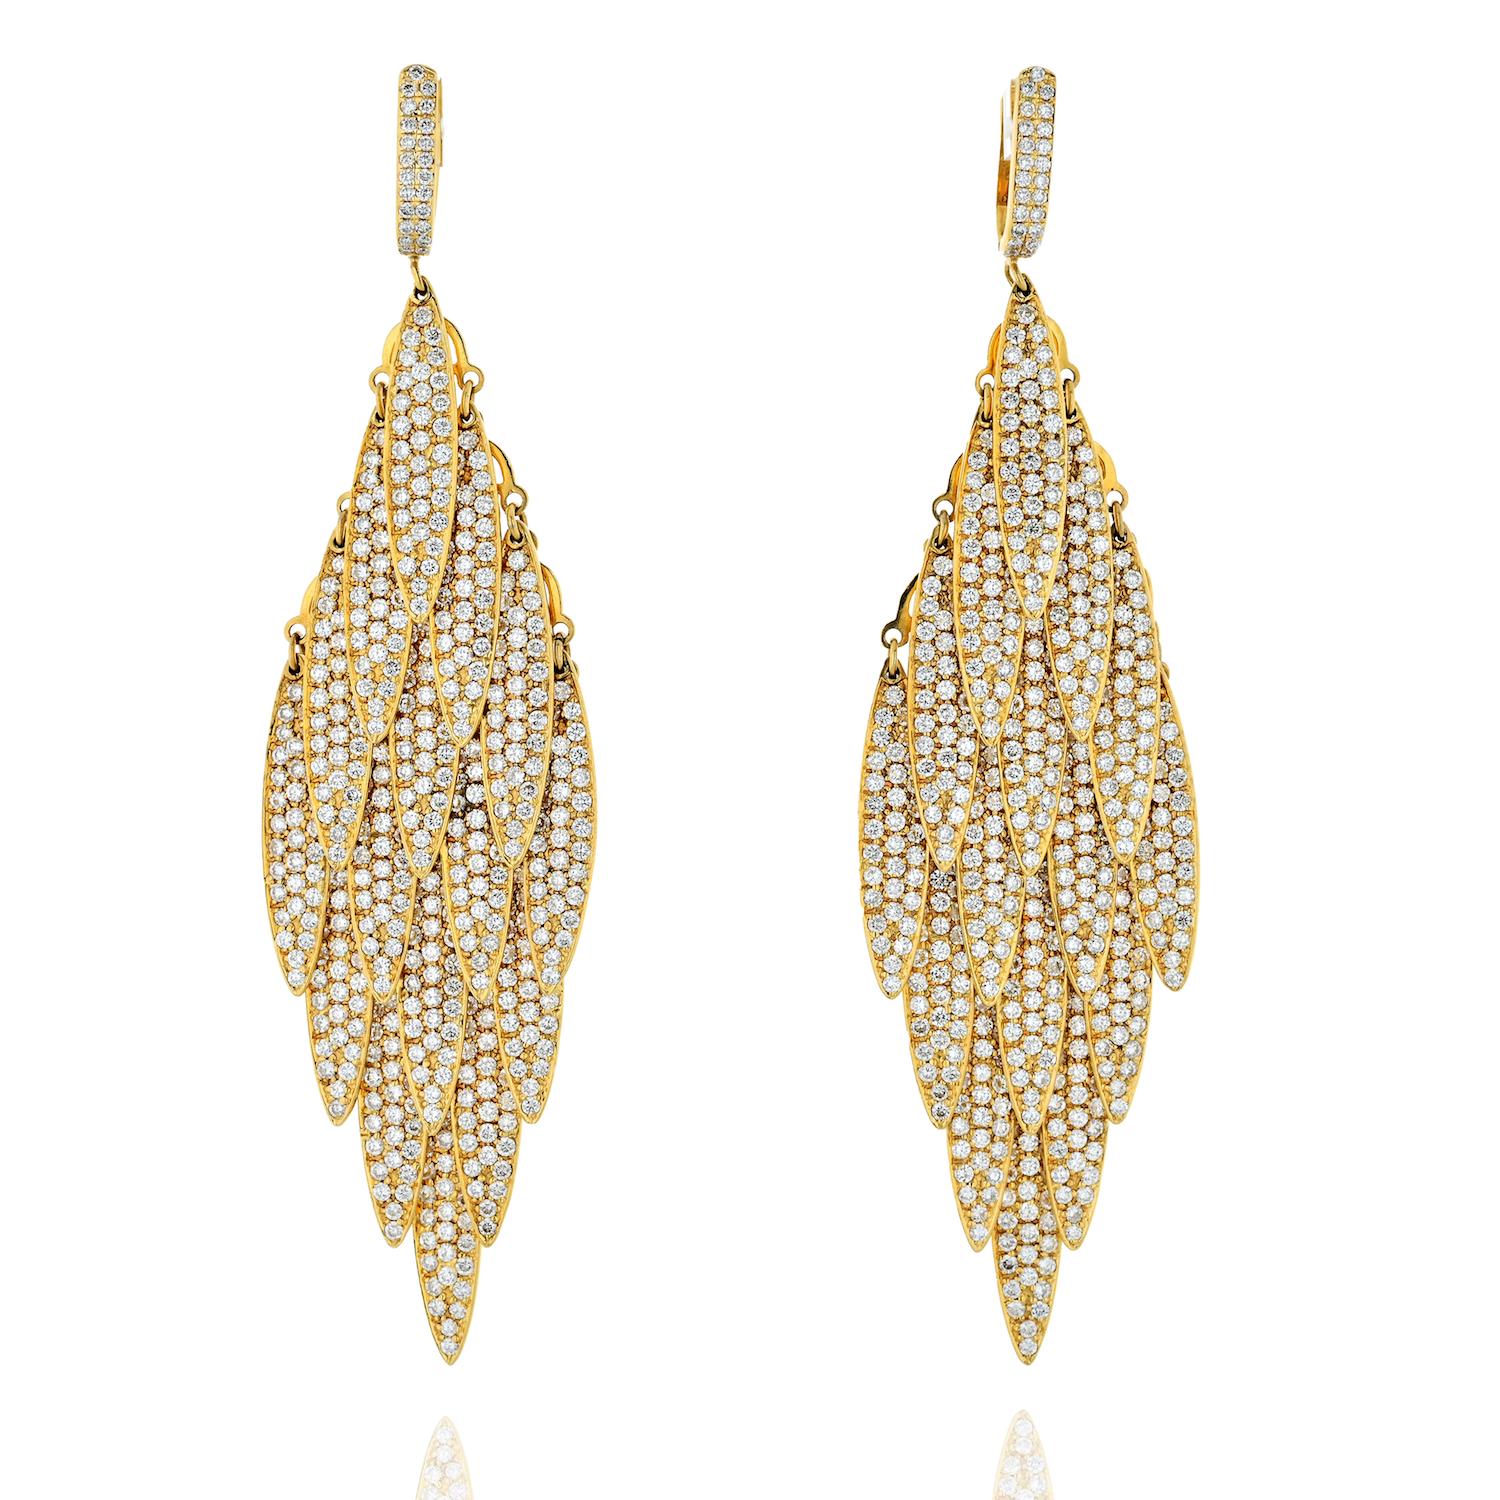 These large pendant luxury diamond drop earrings are crafted in 18K yellow gold mounted with 15 carats of round cut diamonds. There are 16 dangling plates that comprise a wonderful soft shaking earring. Each earring is finished by a post with a